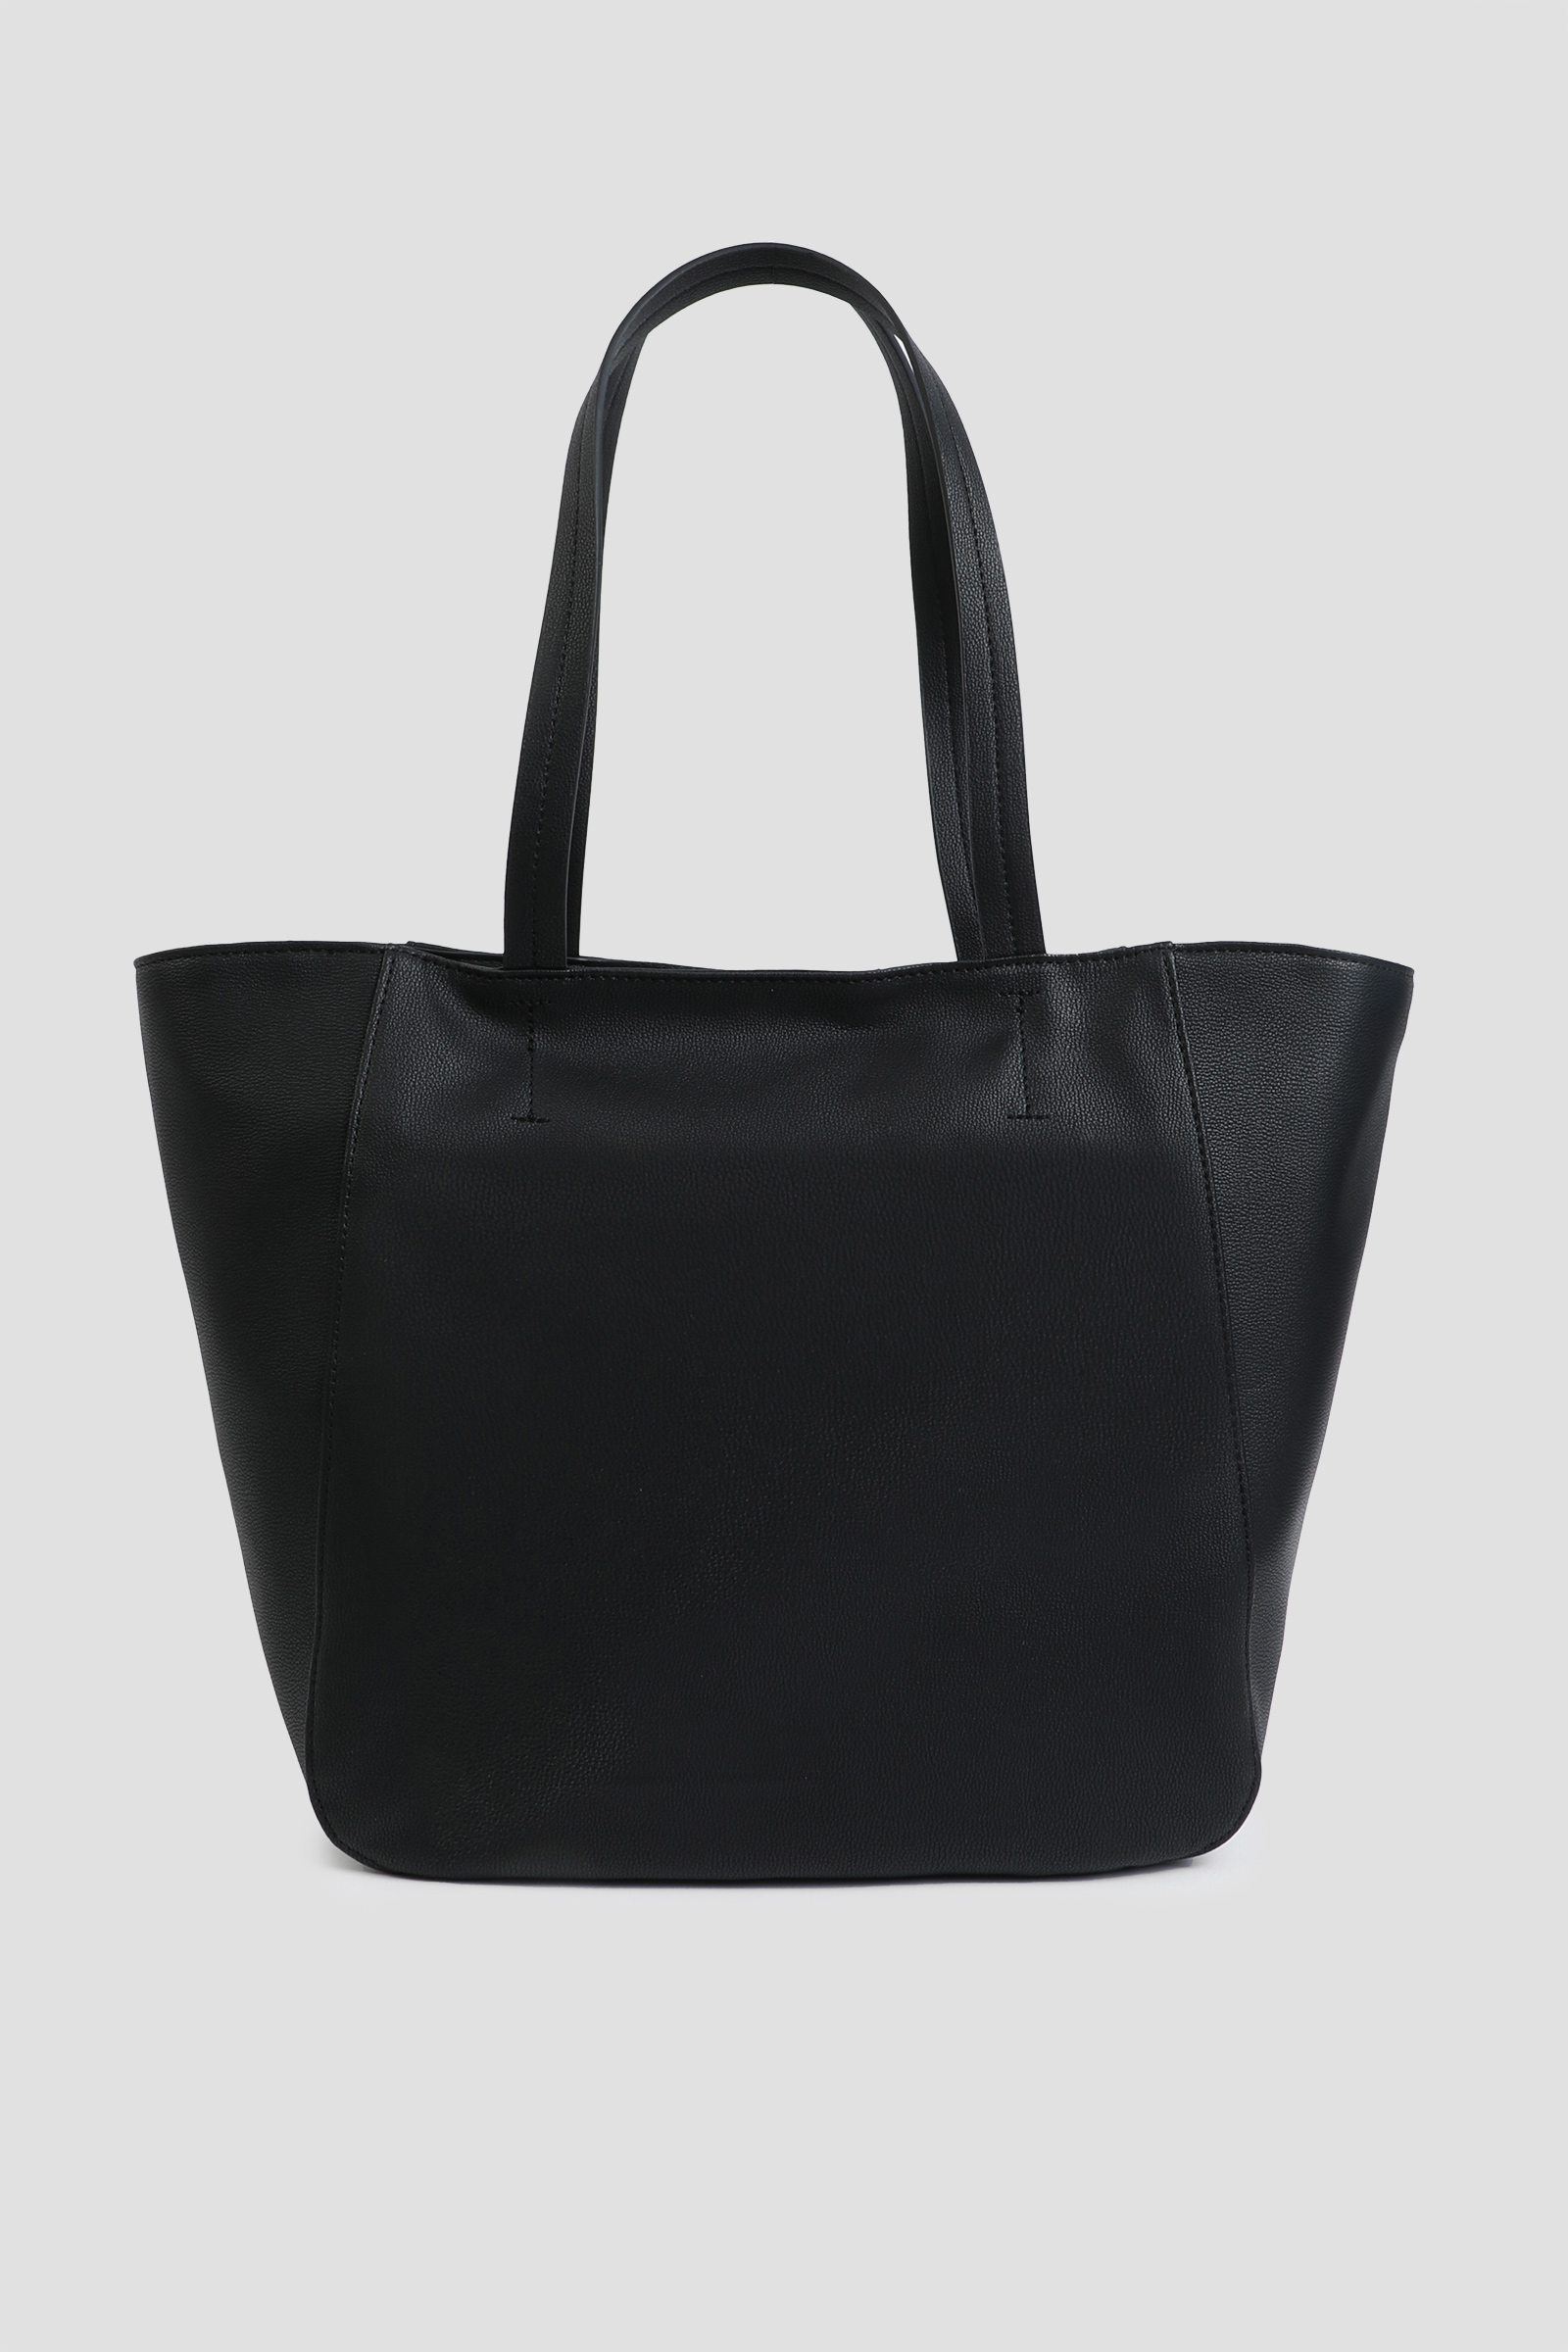 Ardene Large Black Faux Leather Tote Bag | Faux Leather/Polyester